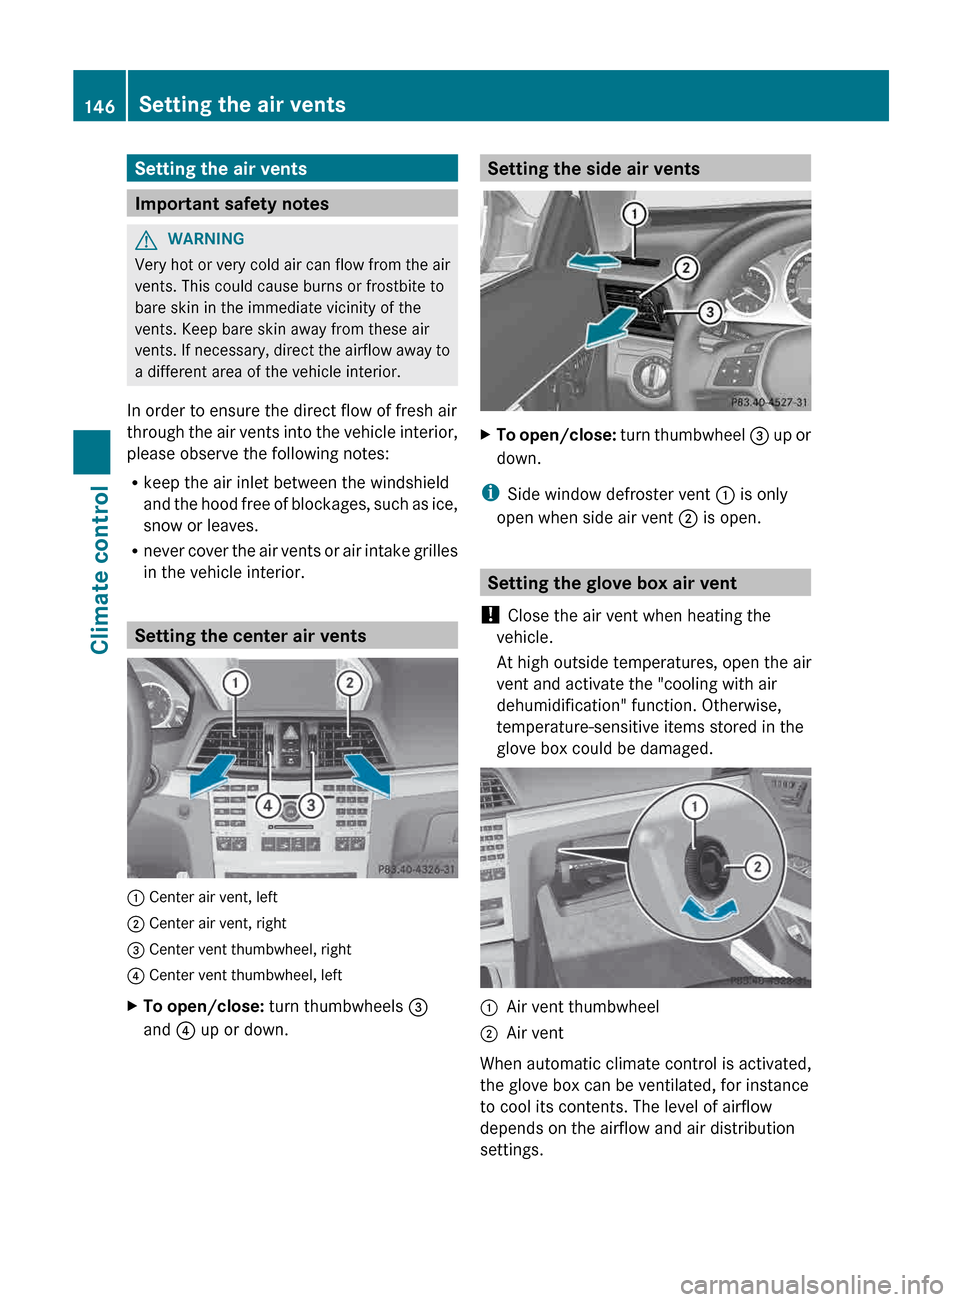 MERCEDES-BENZ E-Class CABRIOLET 2013 C207 Service Manual Setting the air vents
Important safety notes
G
WARNING
Very hot or very cold air can flow from the air
vents. This could cause burns or frostbite to
bare skin in the immediate vicinity of the
vents. K